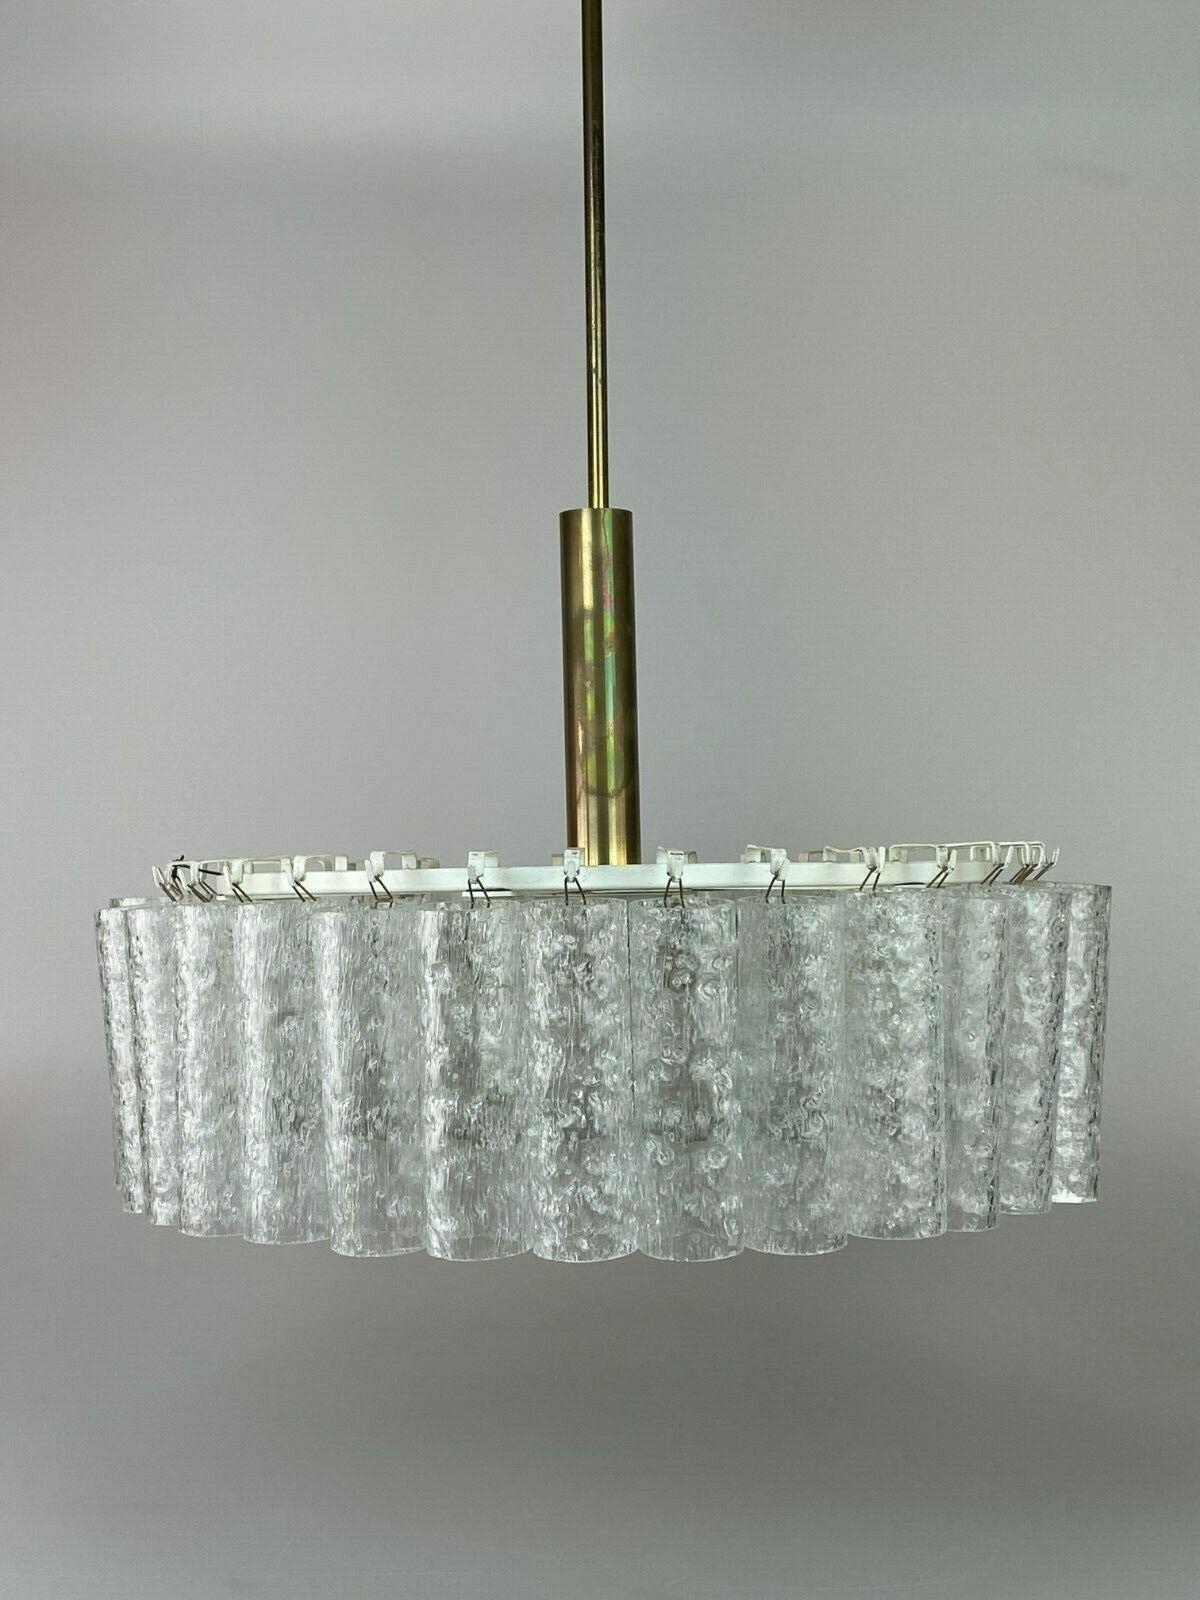 XL 60s 70s chandelier chandelier doria brass glass space age design 60s

Object: chandelier

Manufacturer: Doria

Condition: good

Age: around 1960-1970

Dimensions:

Diameter = 47cm
Height = 68cm

Other notes:

The pictures serve